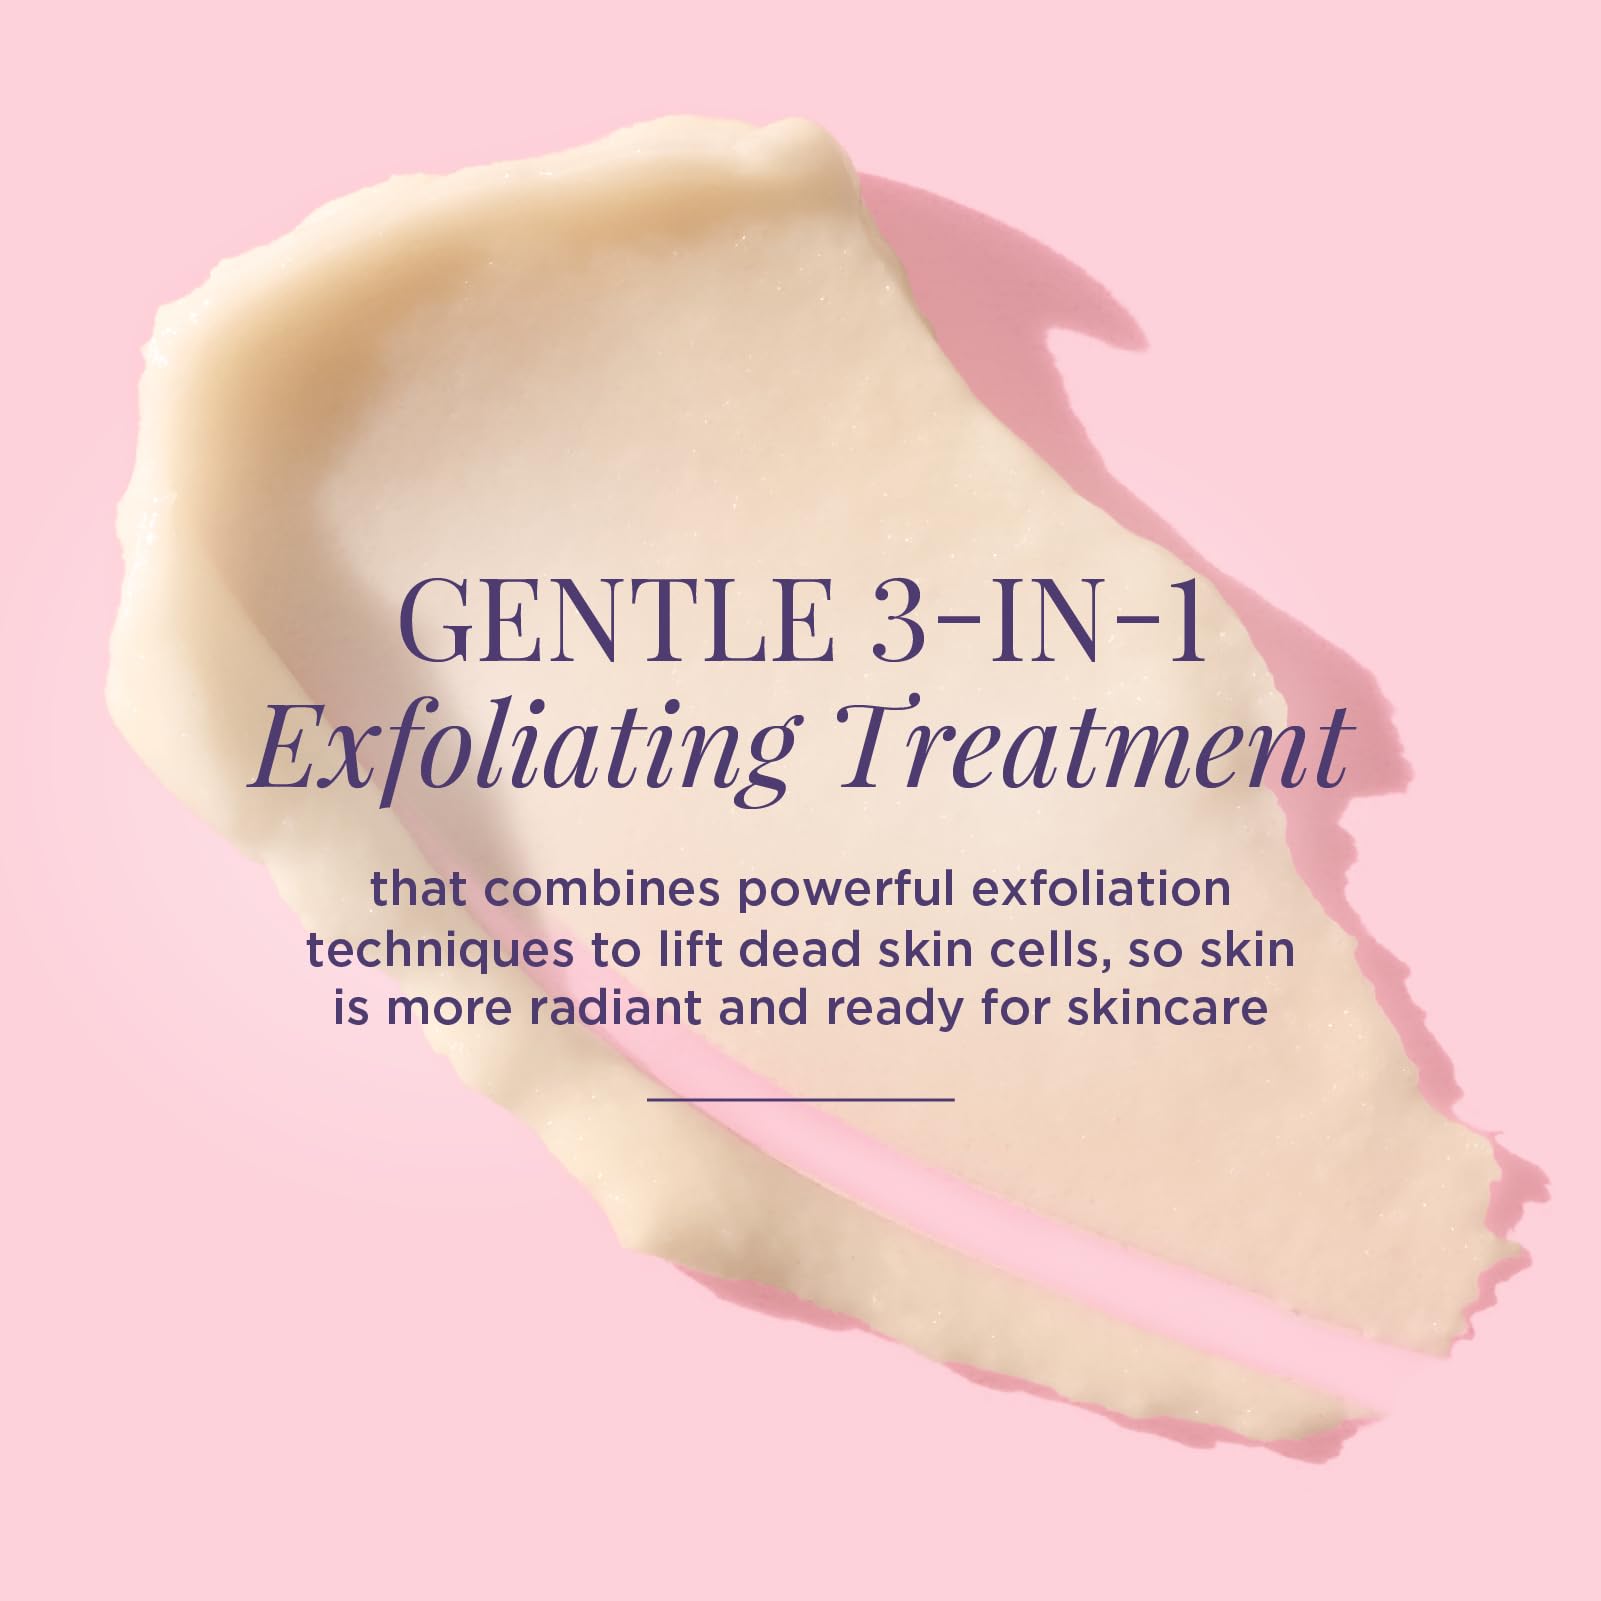 Meaningful Beauty Intensive Triple Exfoliating Treatment